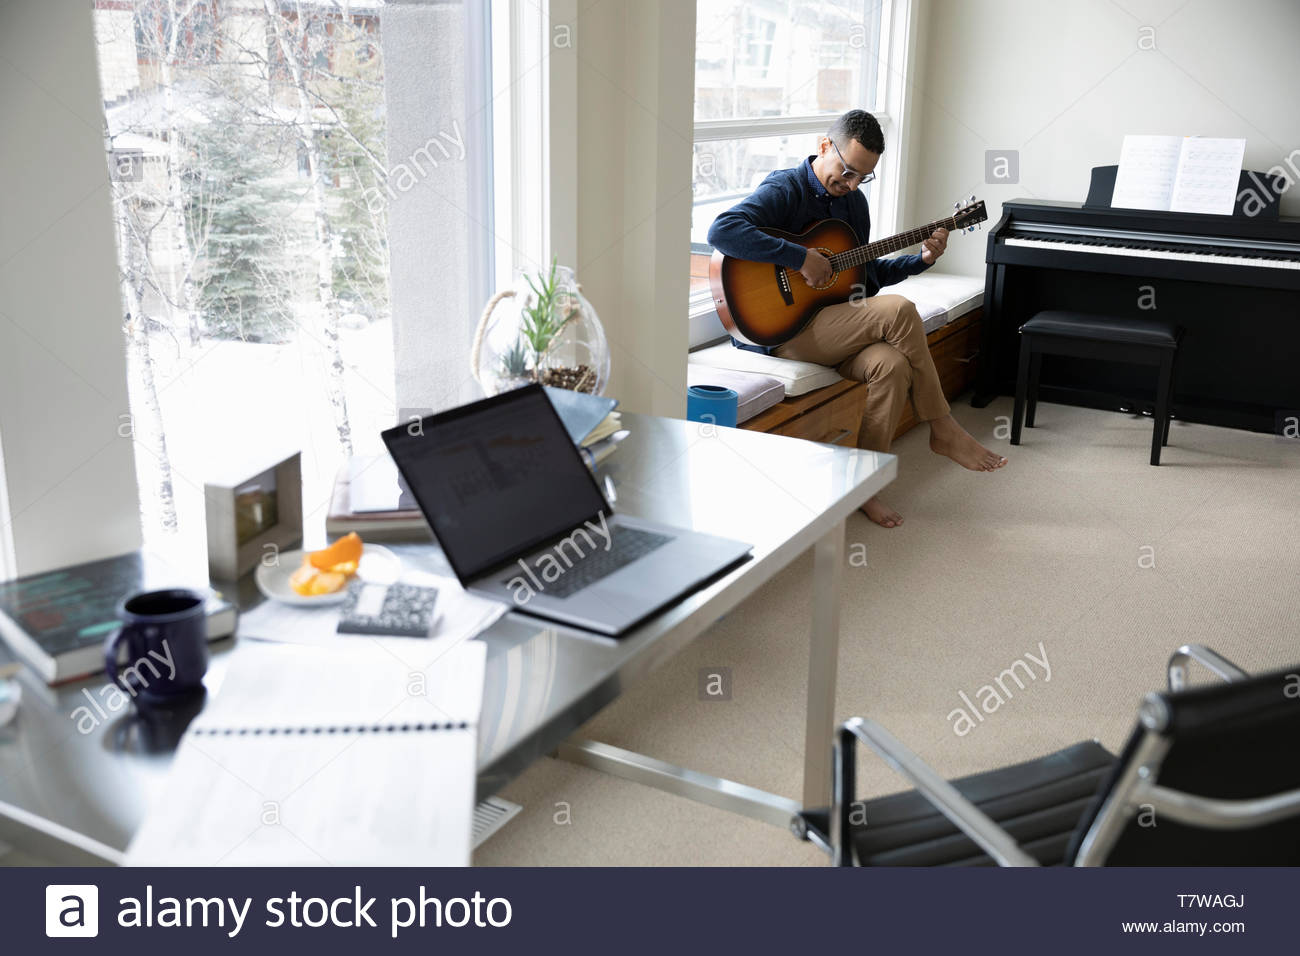 Man taking a break from working at home, playing guitar in home office Stock Photo